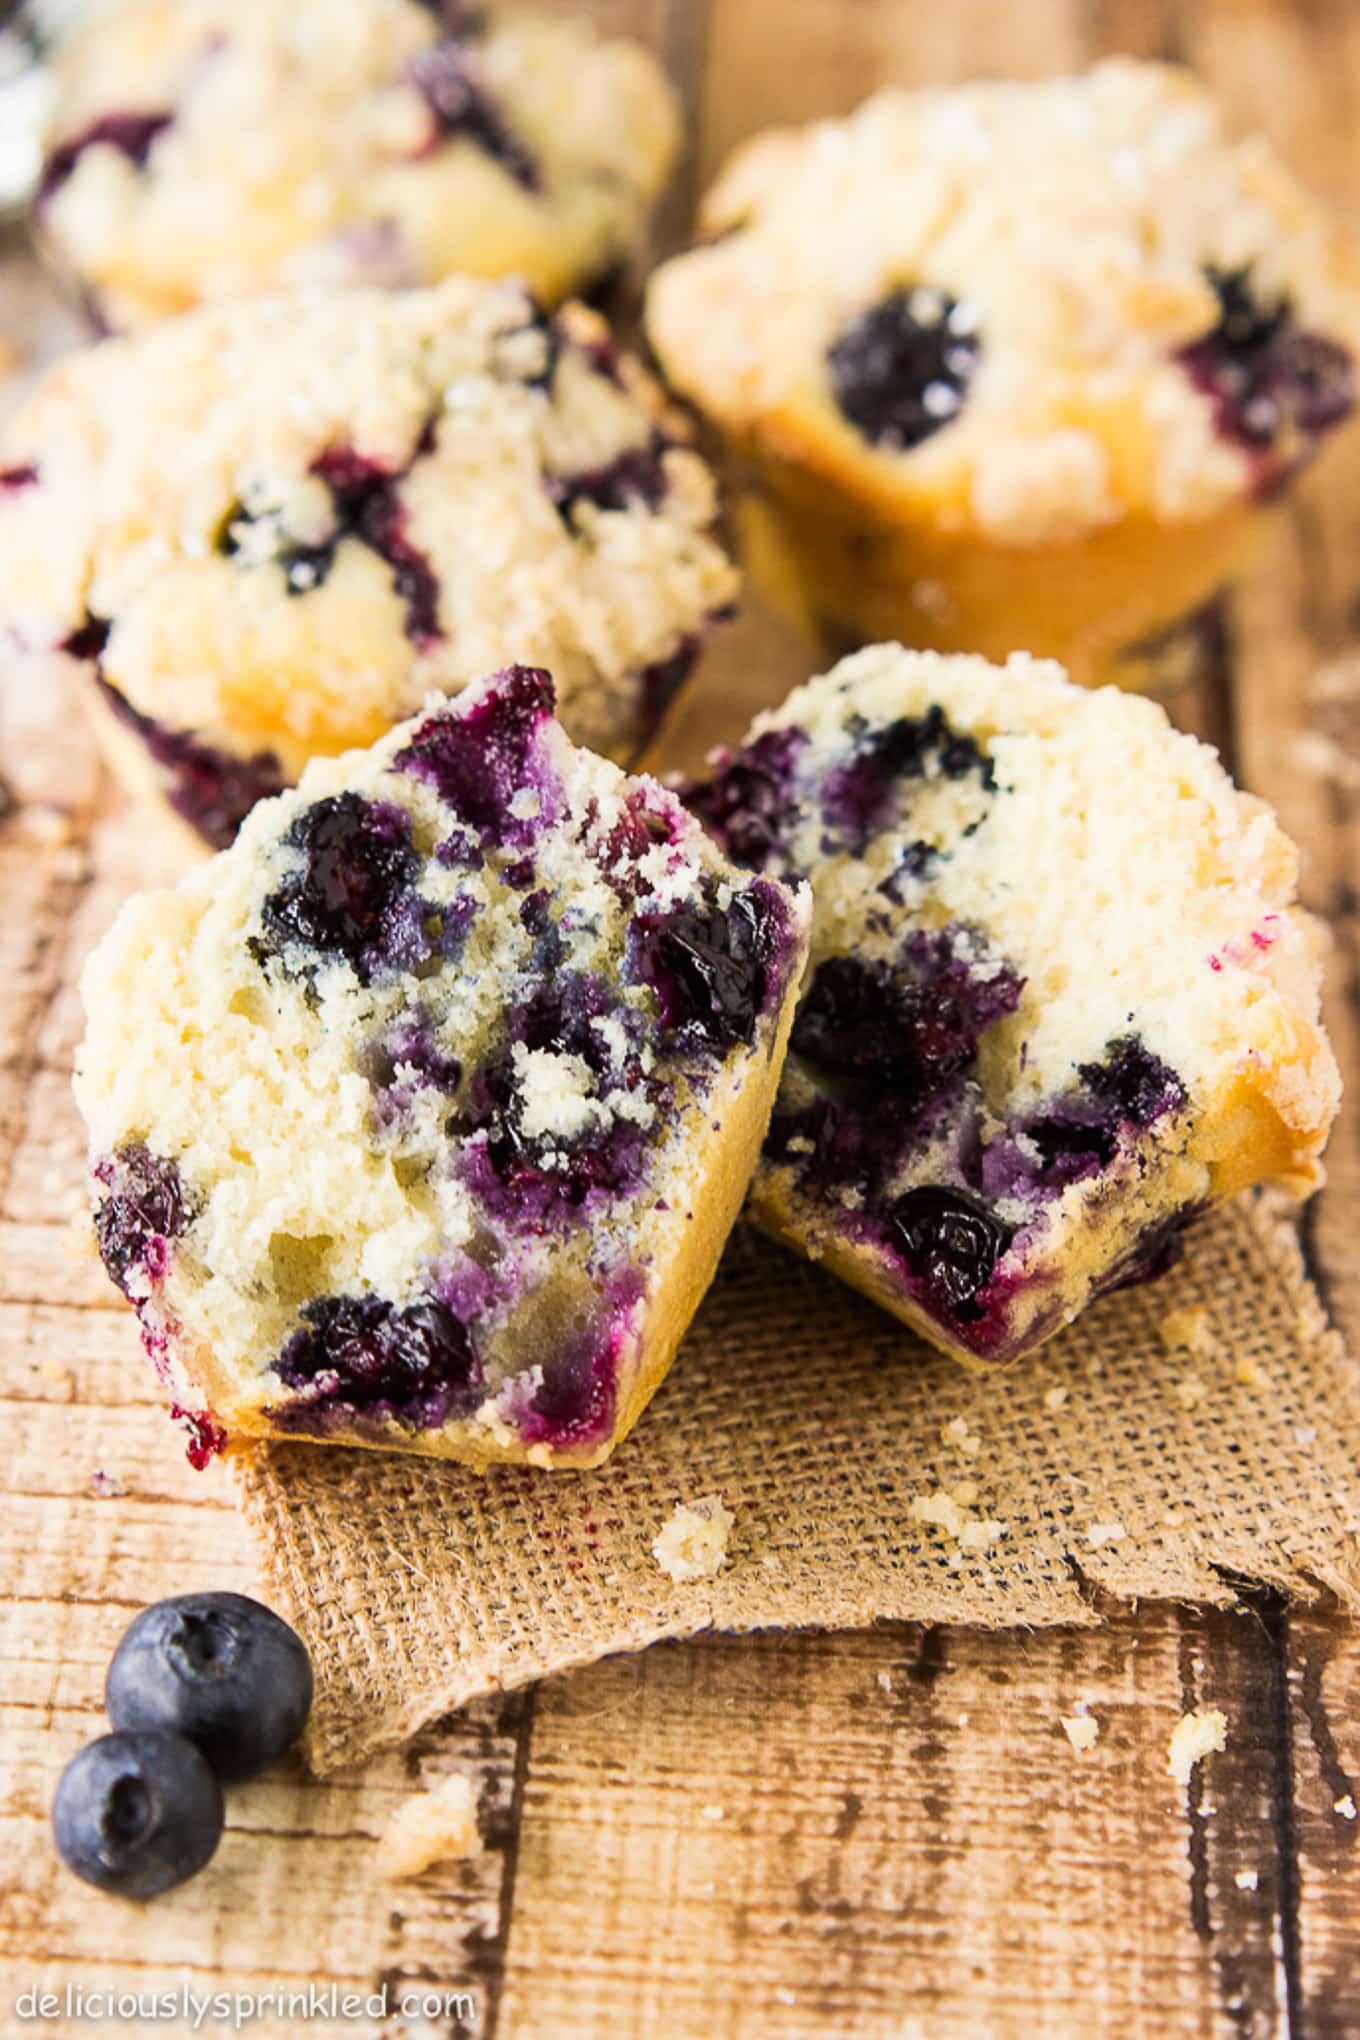 Homemade blueberry muffins on a burlap lined table with one cut in half to show the inside.